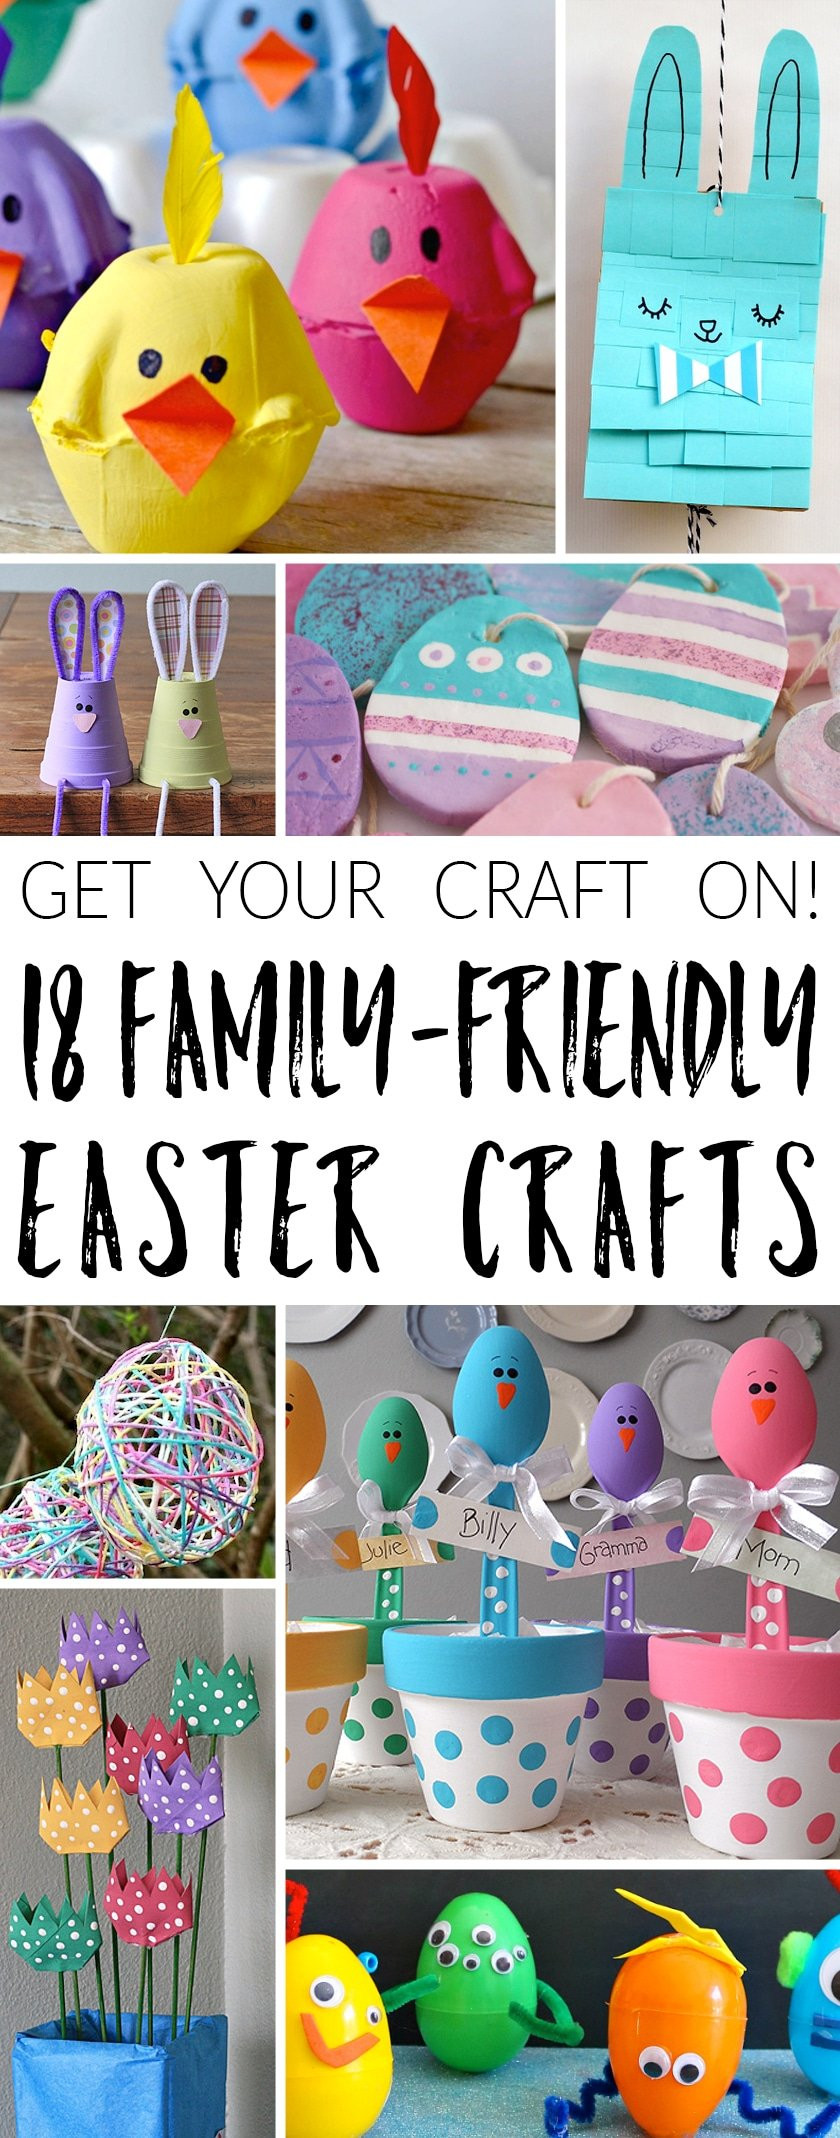 Easter Activities For Families
 Get your craft on 18 family friendly Easter craft ideas